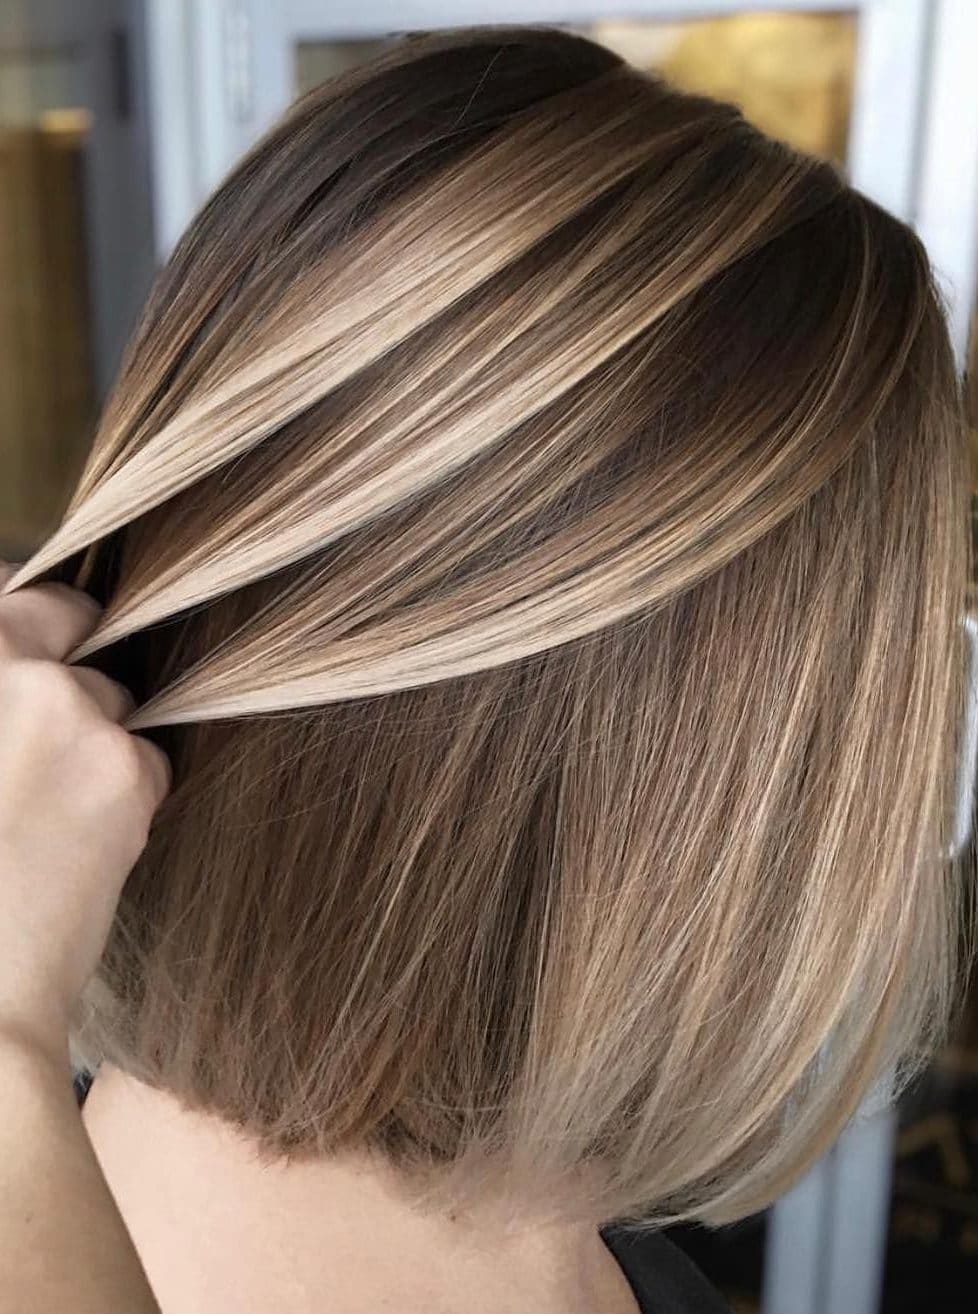 50 Balayage Hair Color Ideas for Blonde Short Straight Hair